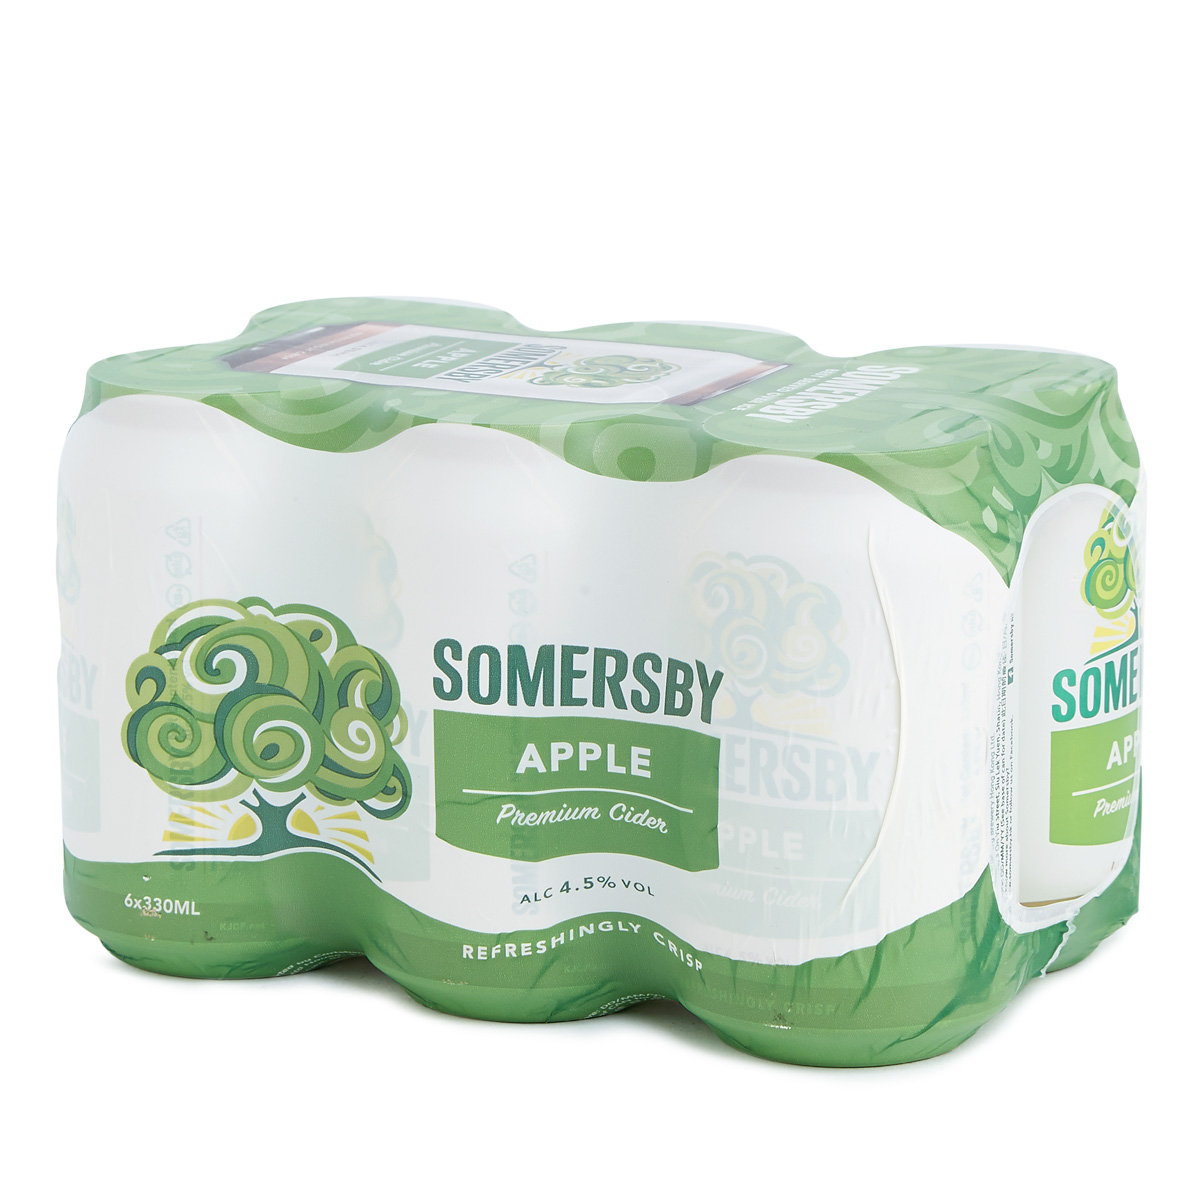 Somersby Apple Cider - Cider - 330ml x 6 can